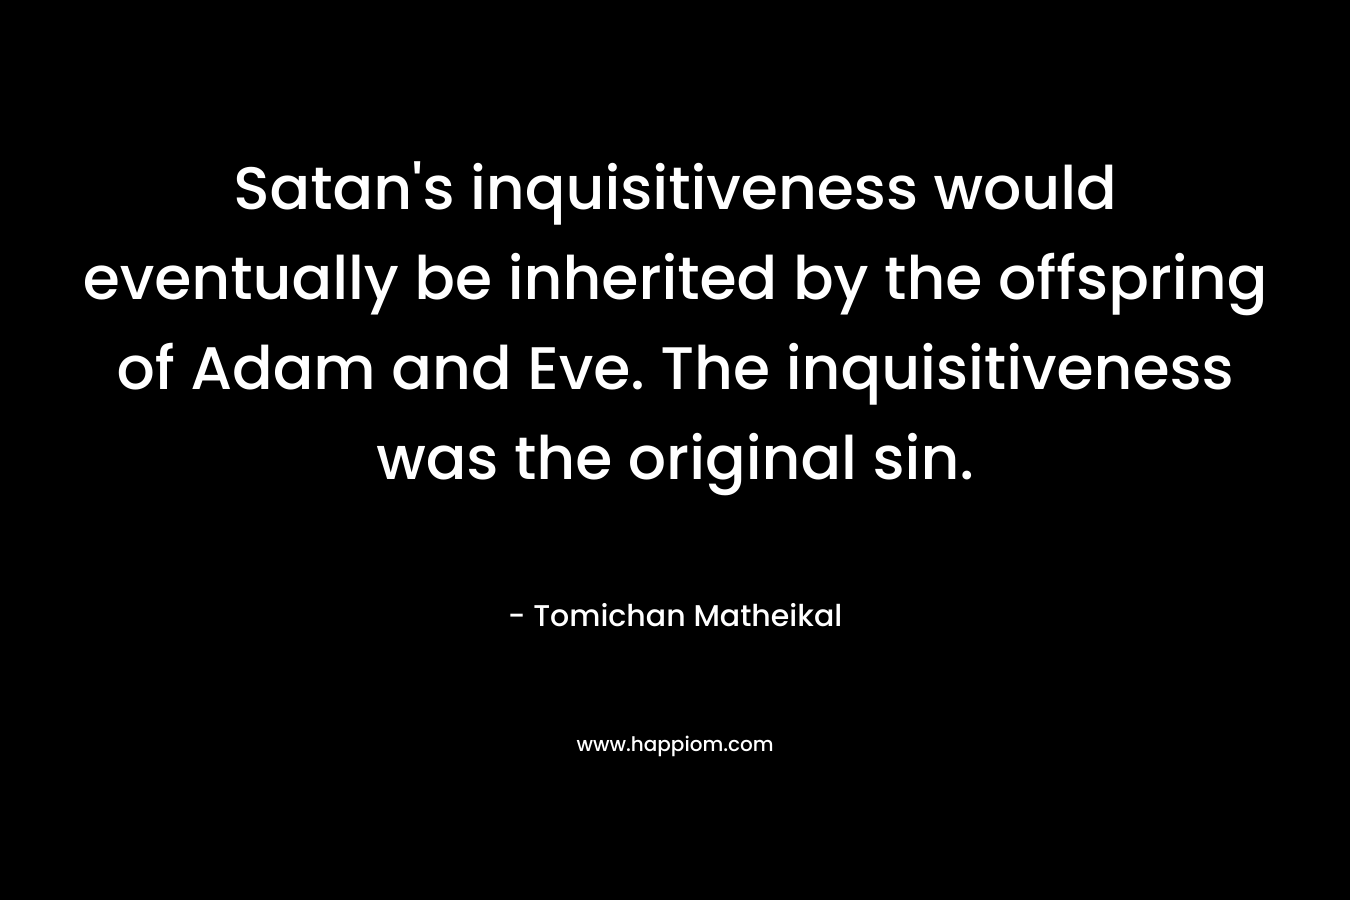 Satan's inquisitiveness would eventually be inherited by the offspring of Adam and Eve. The inquisitiveness was the original sin.